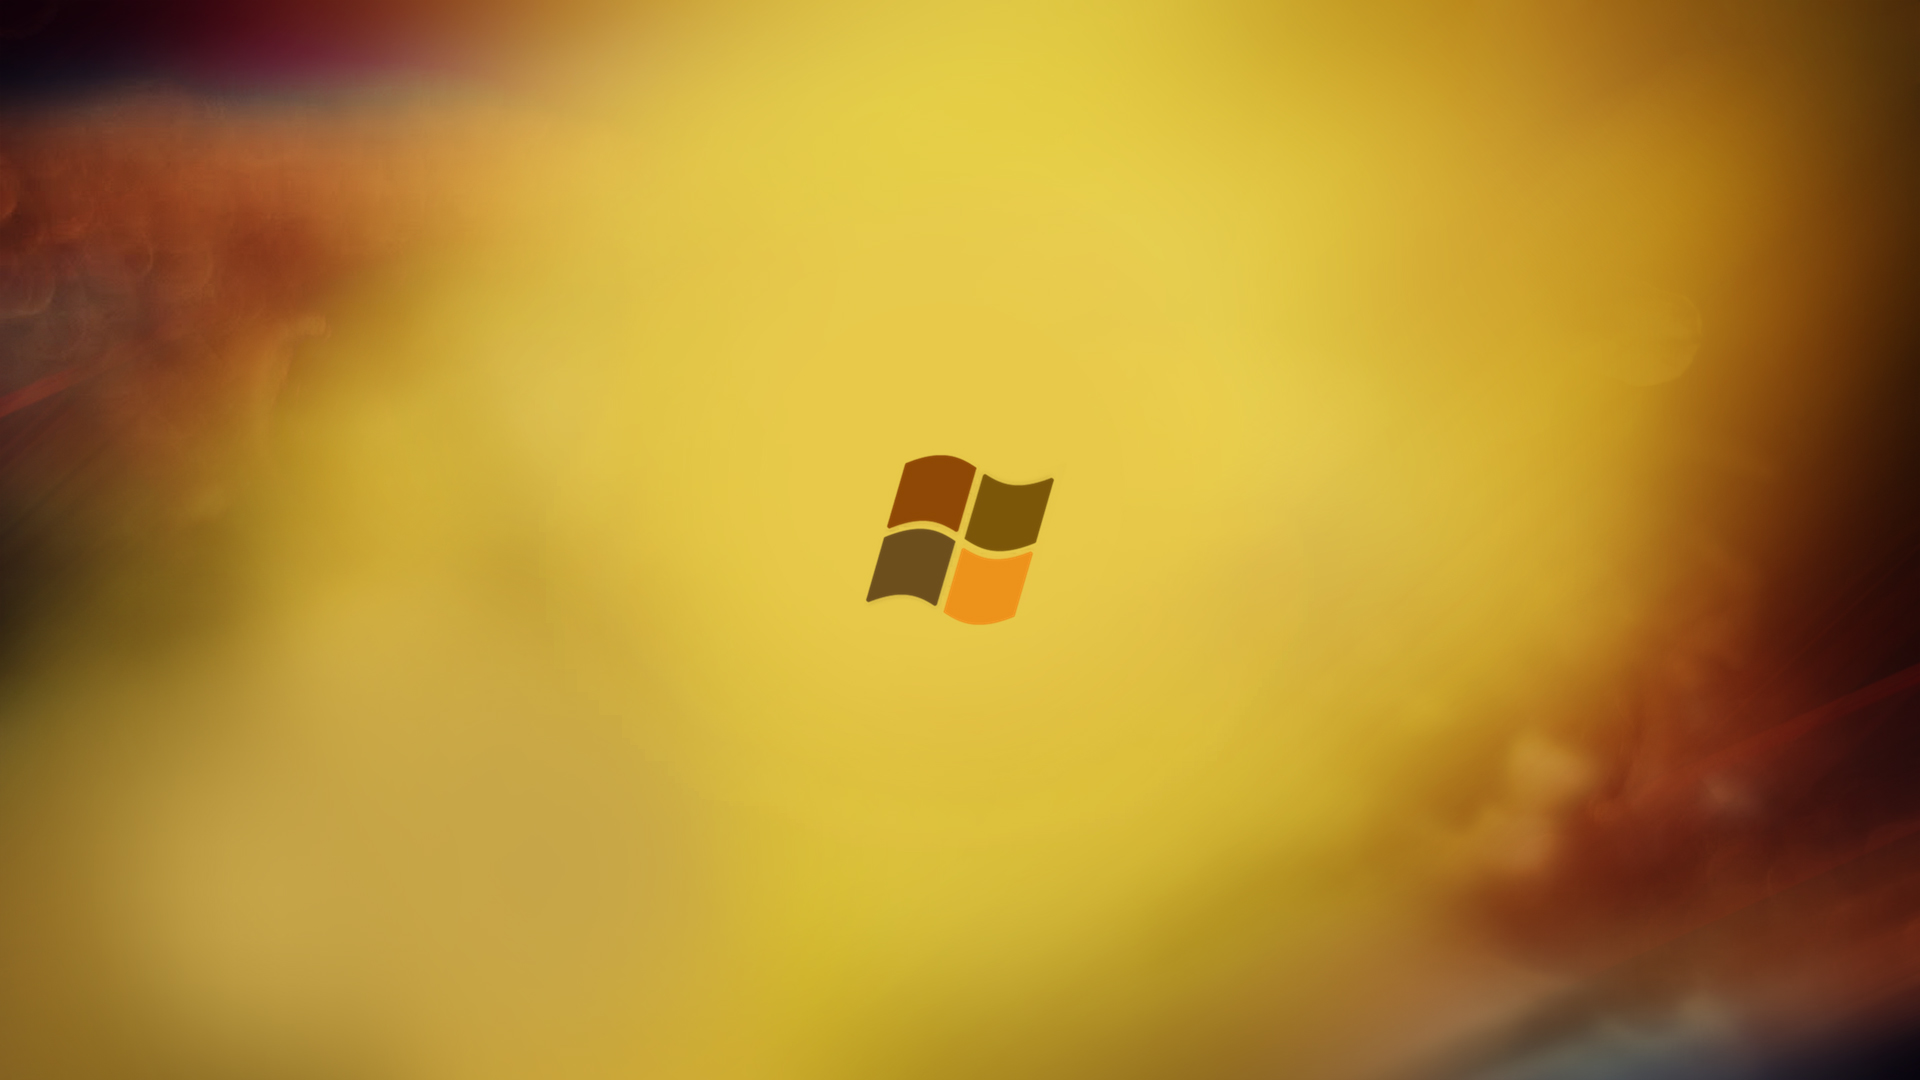 These are the 10 coolest HD windows 8 wallpapers hope you like it